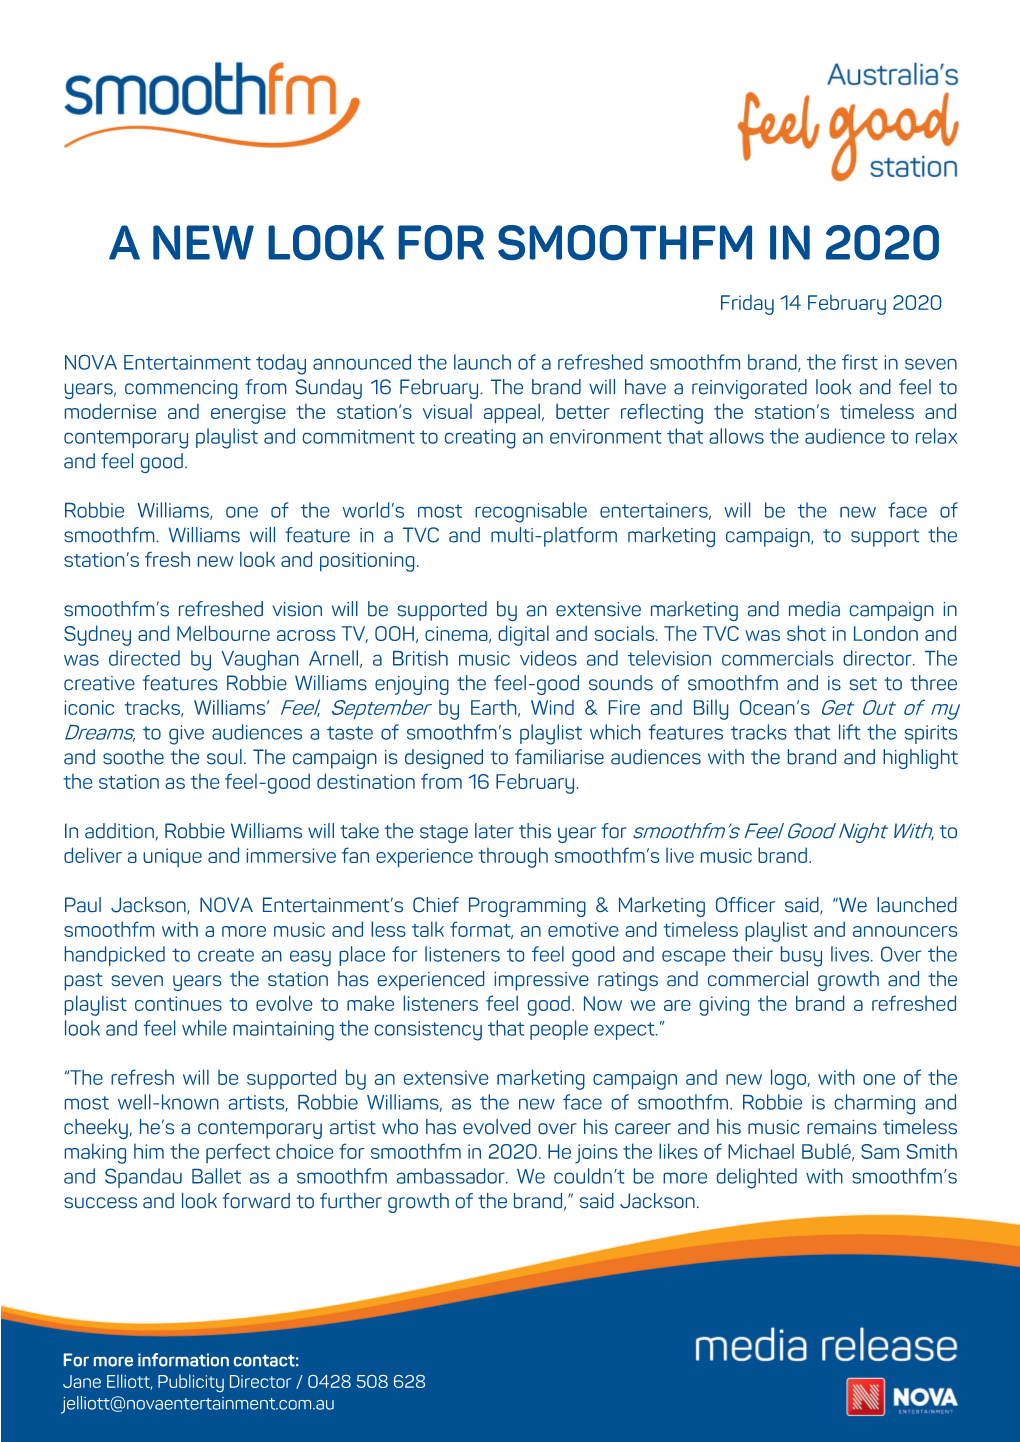 A New Look for Smoothfm in 2020